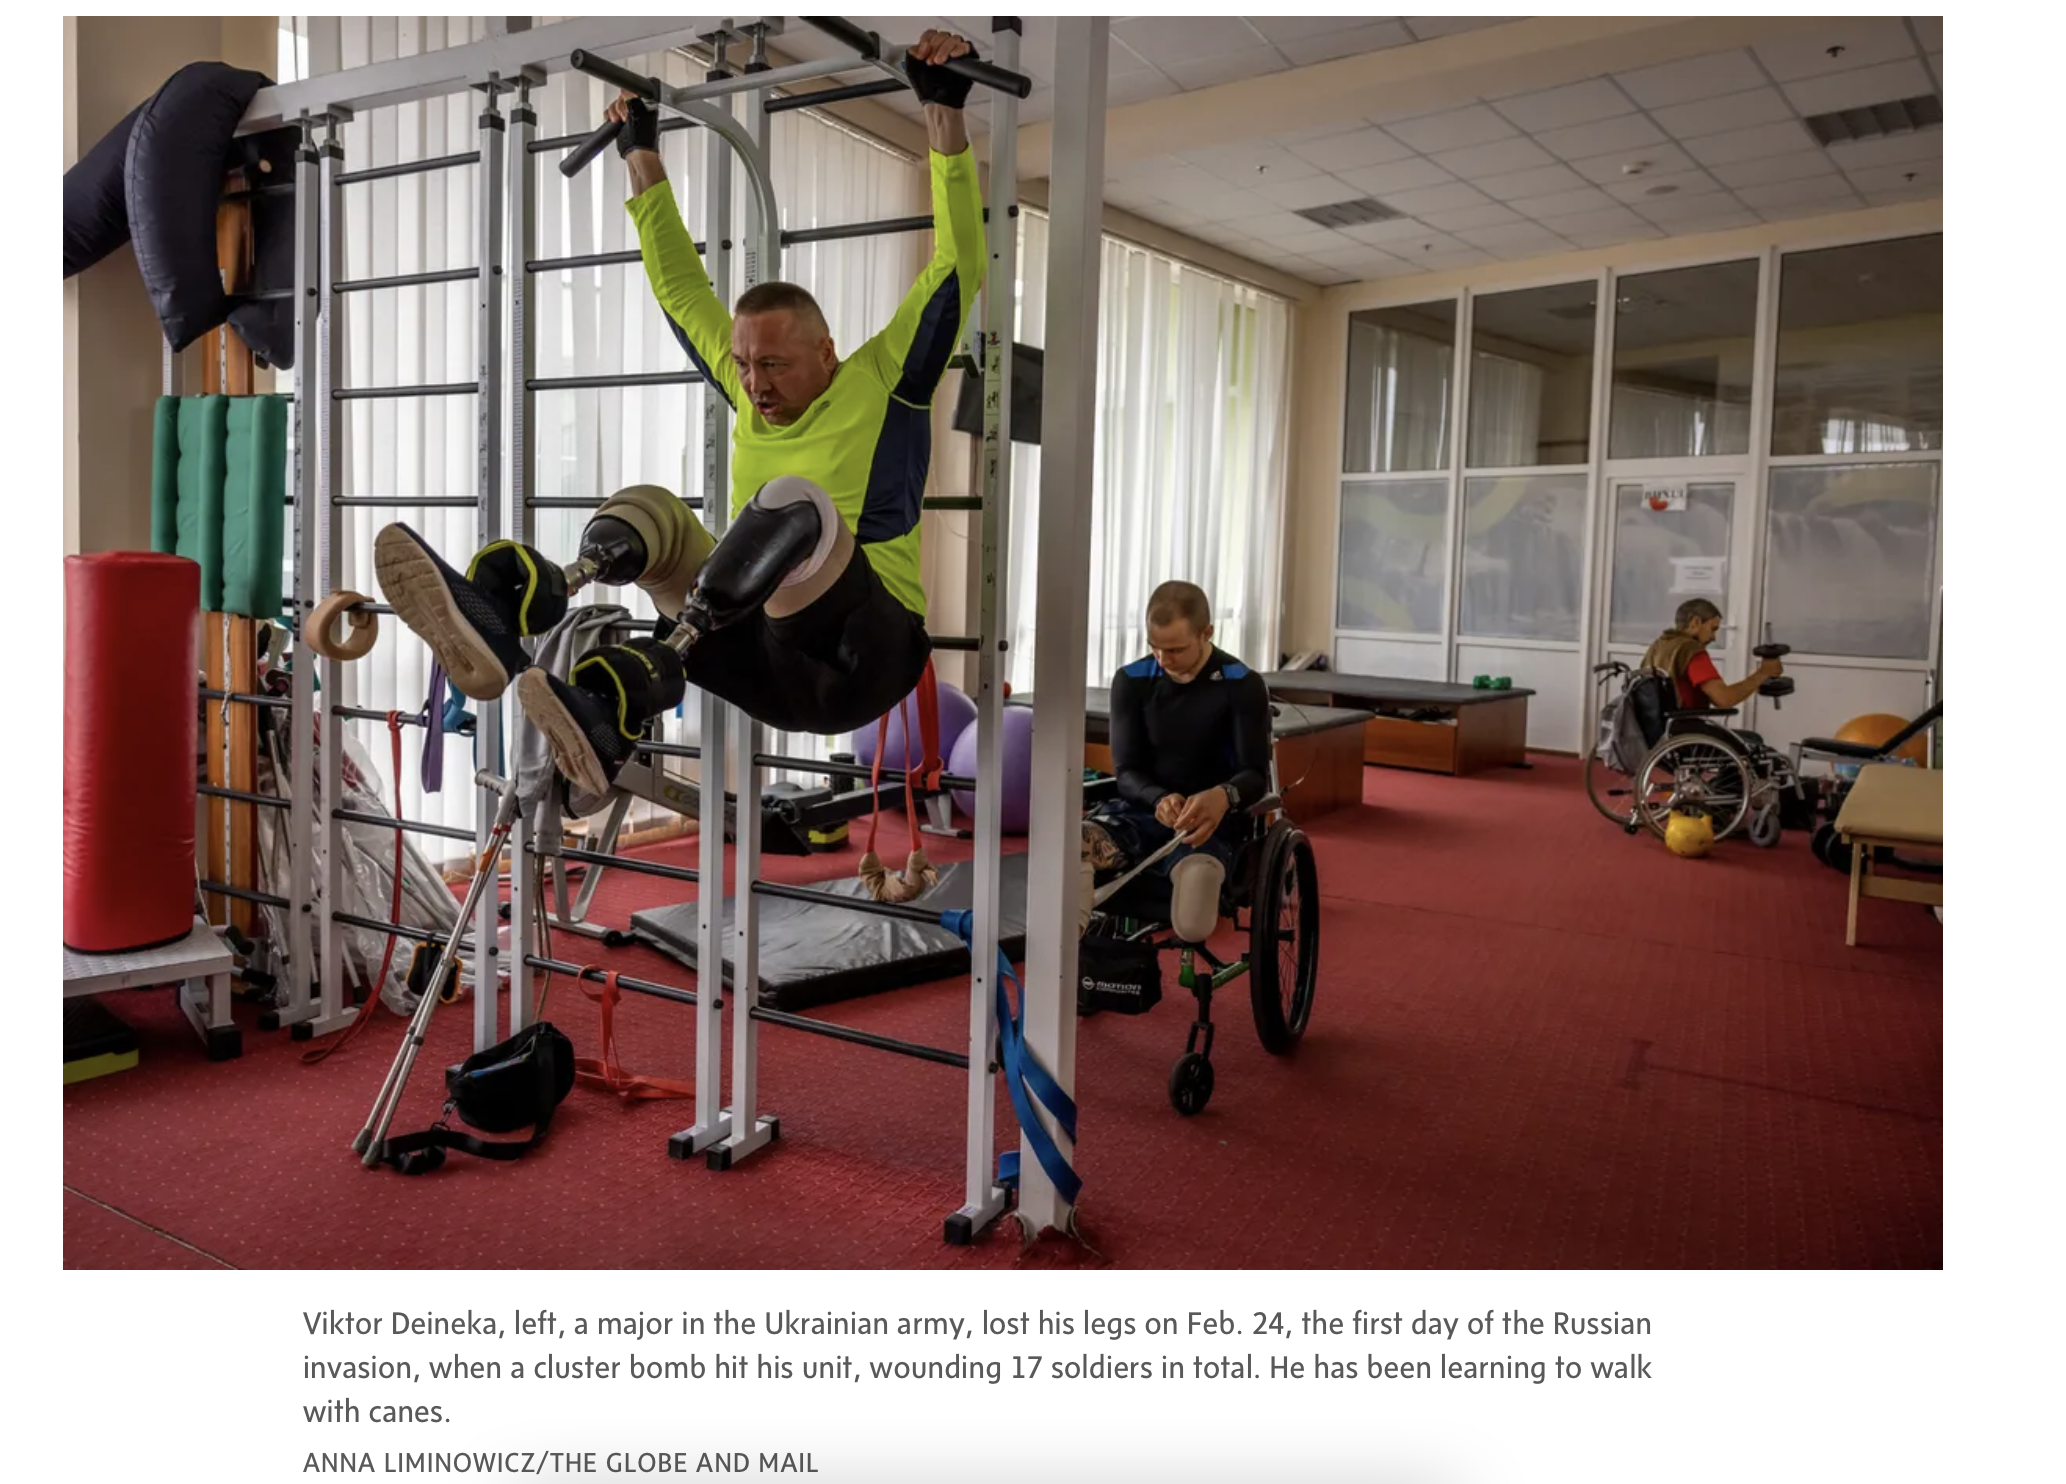 At a rehab centre in Ukraine, soldiers who have lost limbs learn how to restart their lives